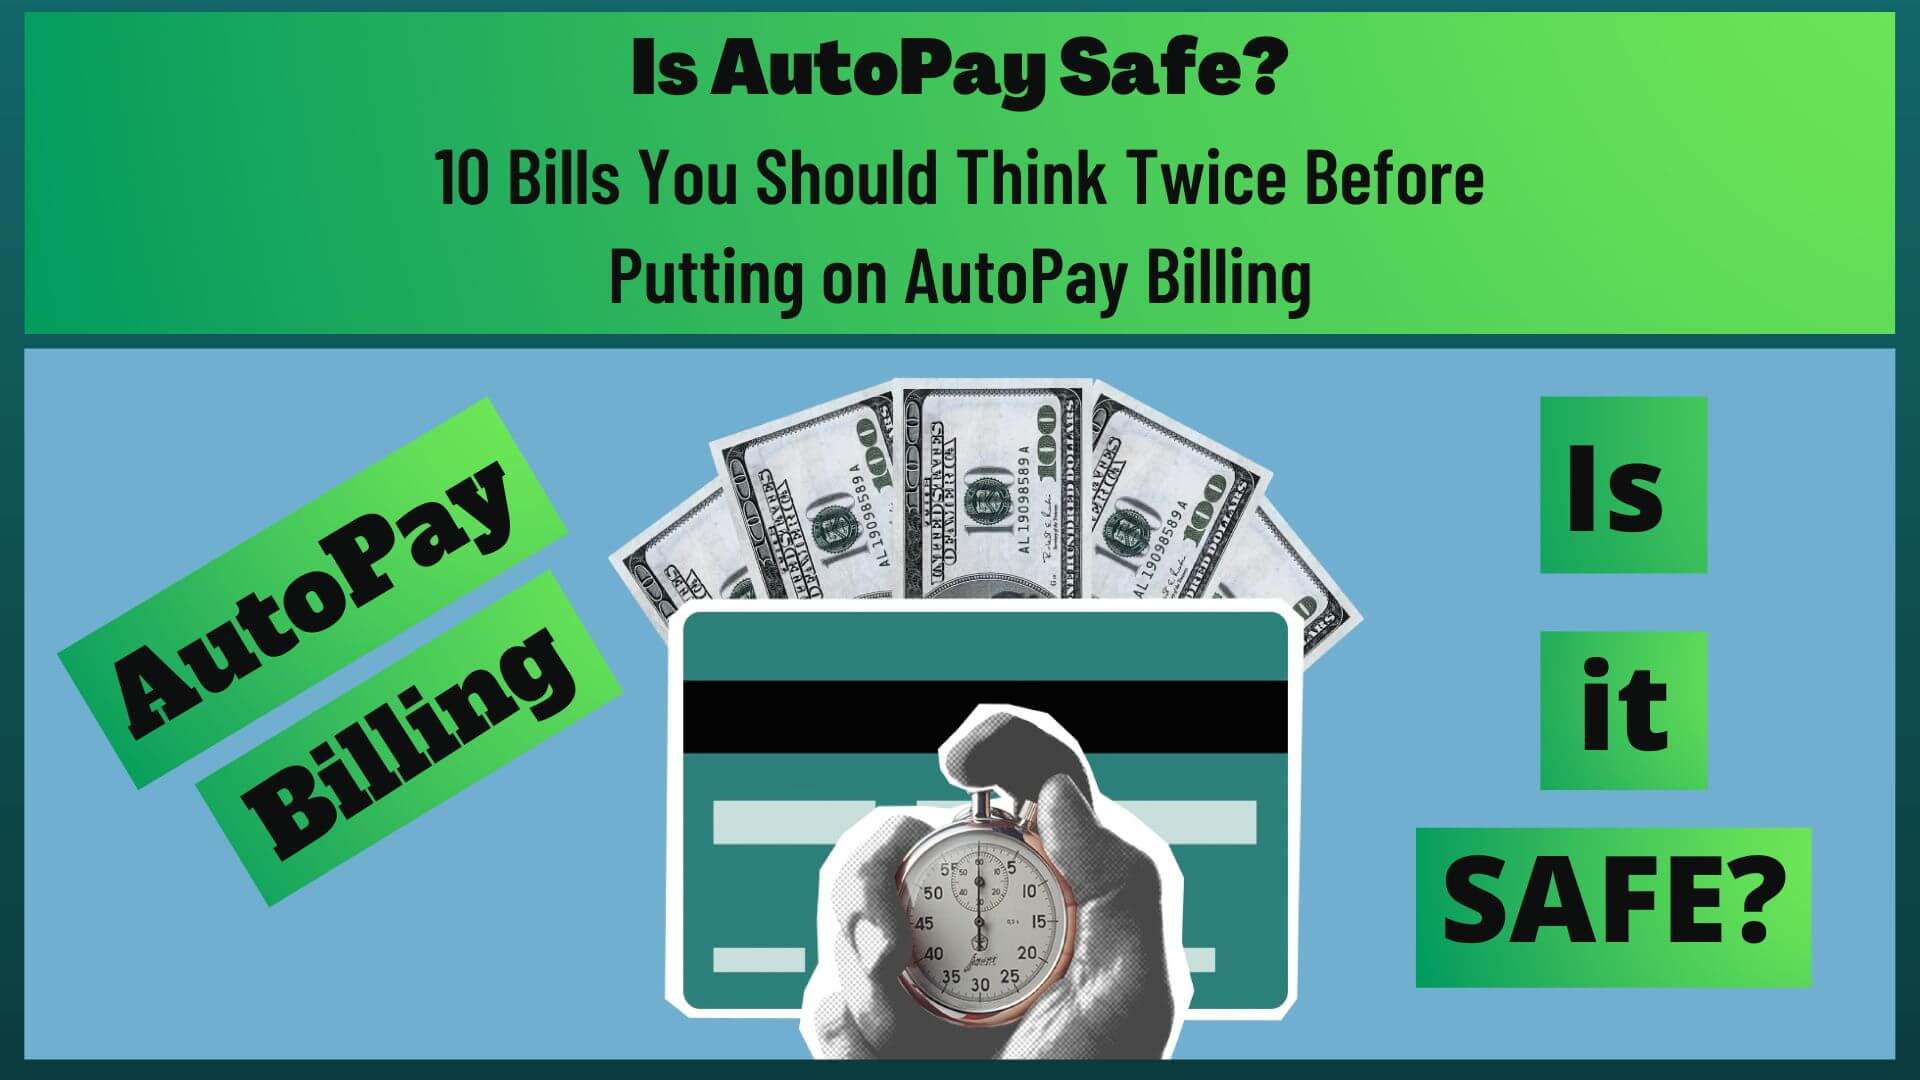 Forgot or missed your payment deadline? One way to avoid them is putting your bills on autopay billing. Here are 10 bills you should know.